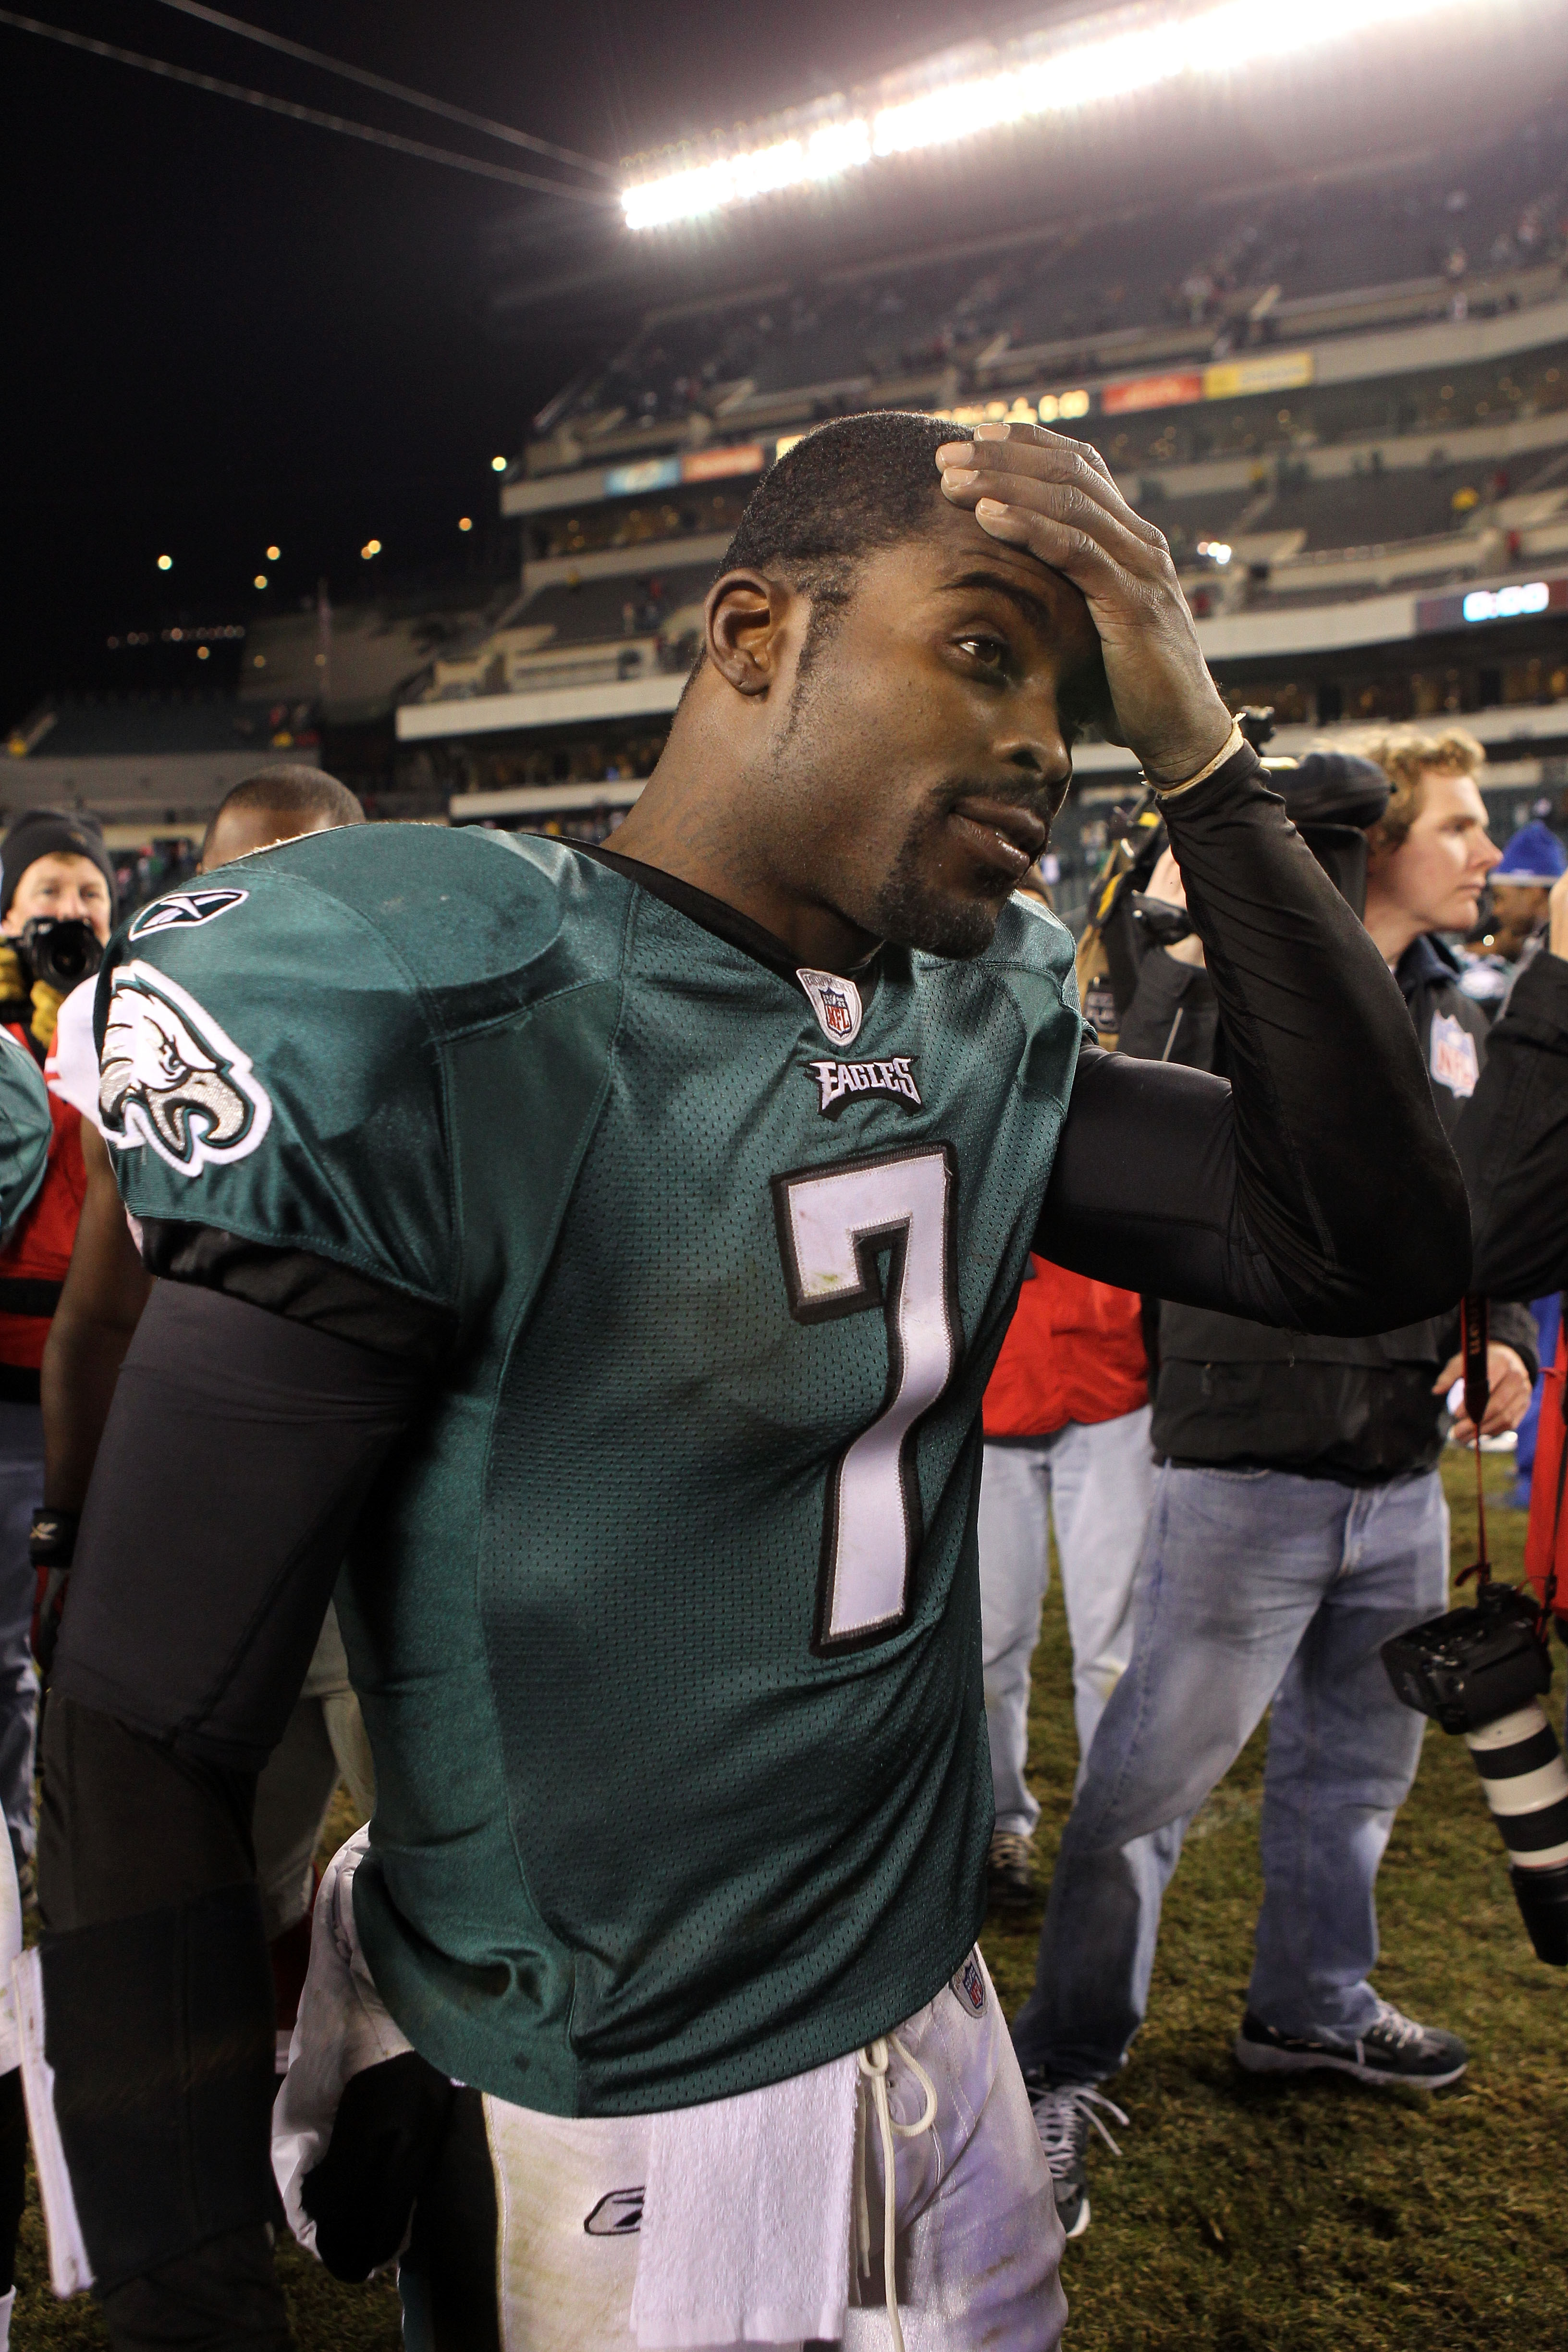 Michael Vick and the Philadelphia Eagles find their wings after a  stuttering start to the season - Mirror Online